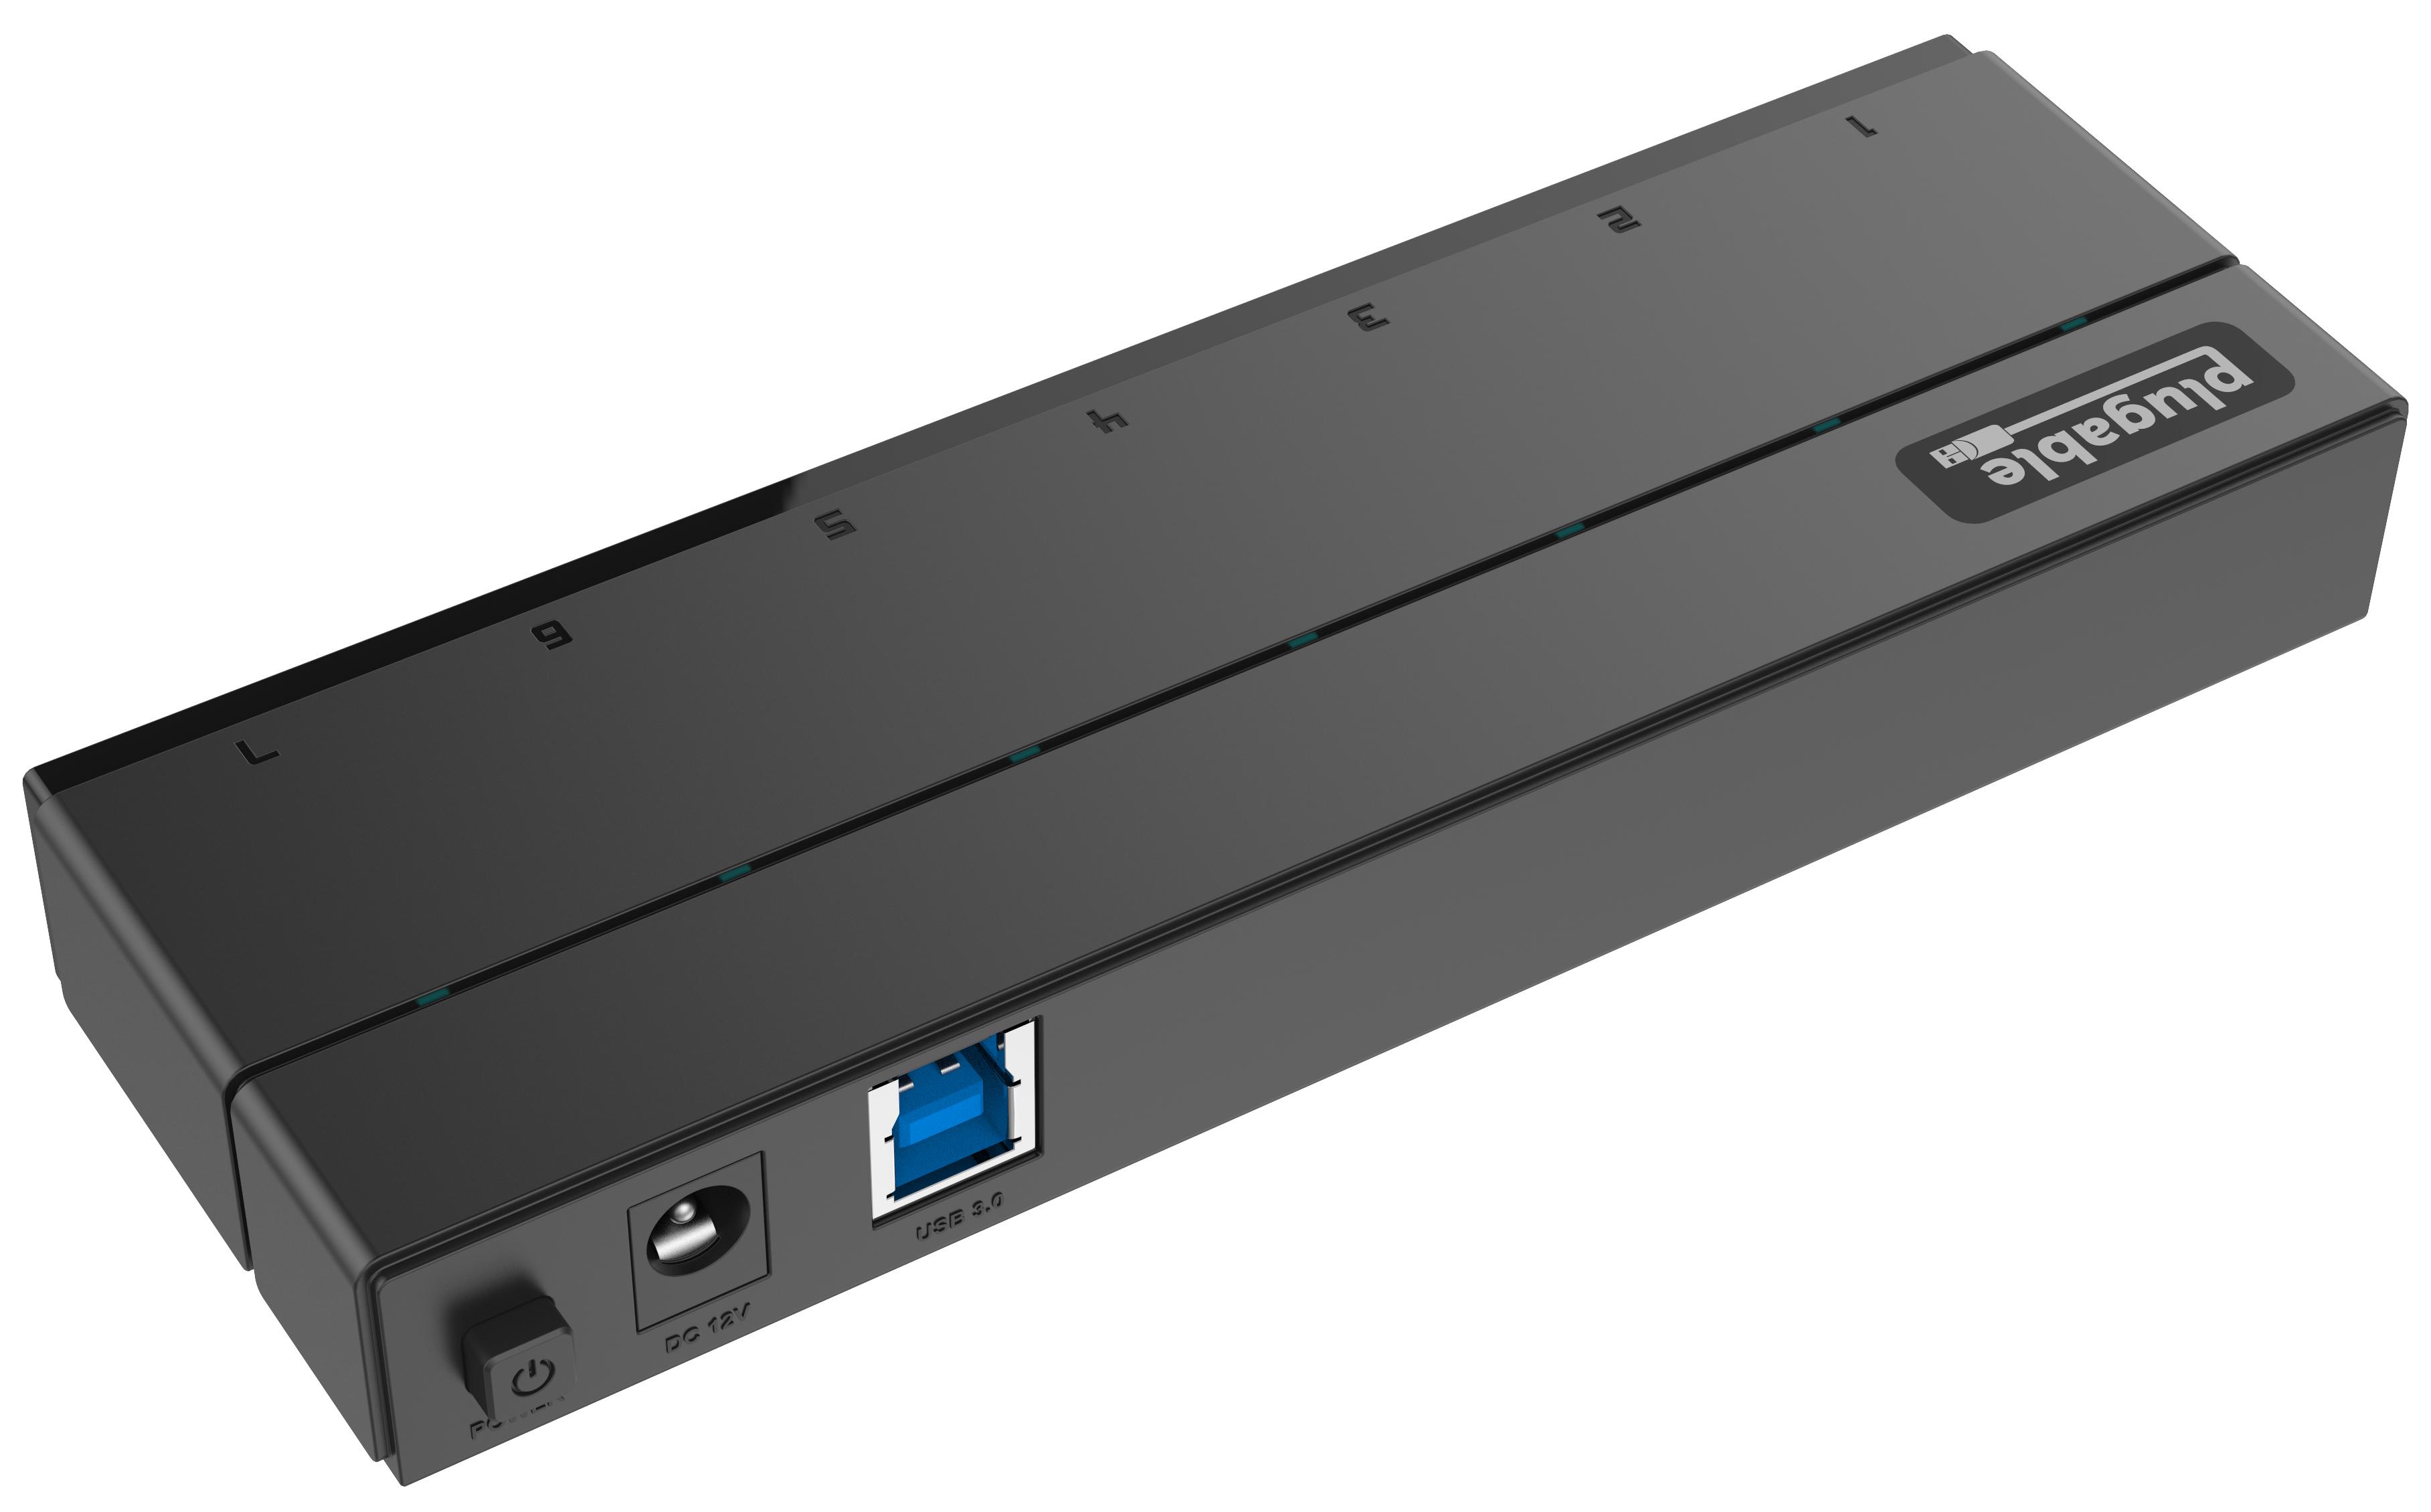 Plugable 7-Port USB 3.0 Hub with 36W Power Adapter - image 3 of 4